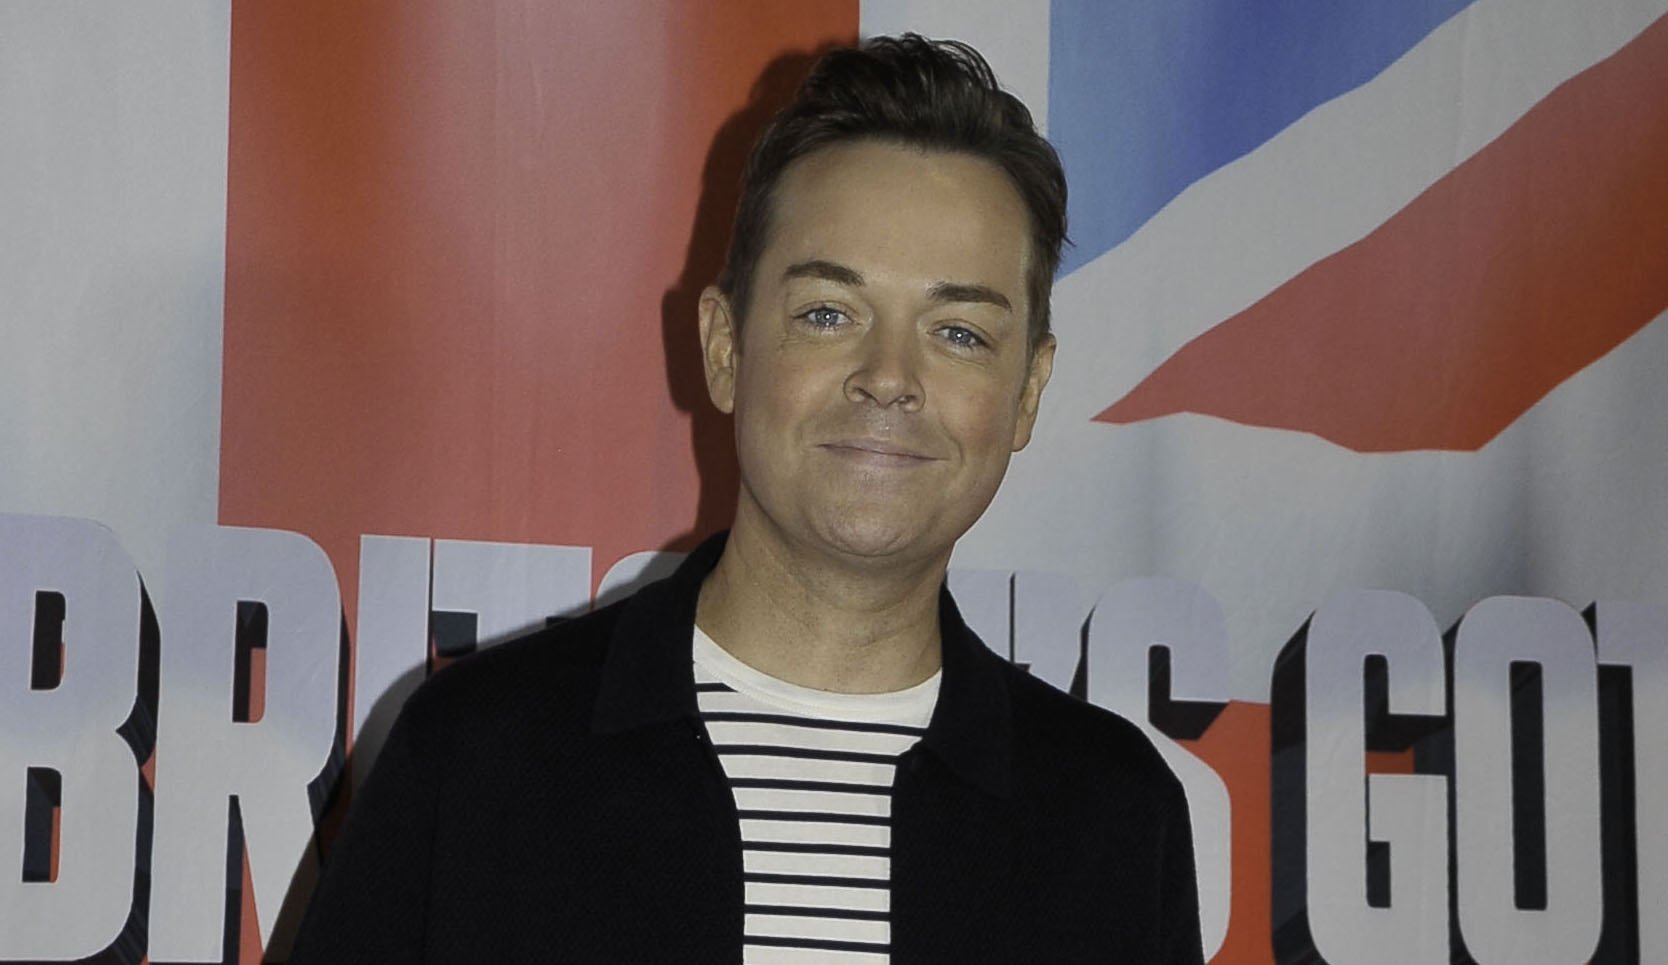 Stephen Mulhern Net Worth goes hands in hand with his time on Britain's Got More Talent